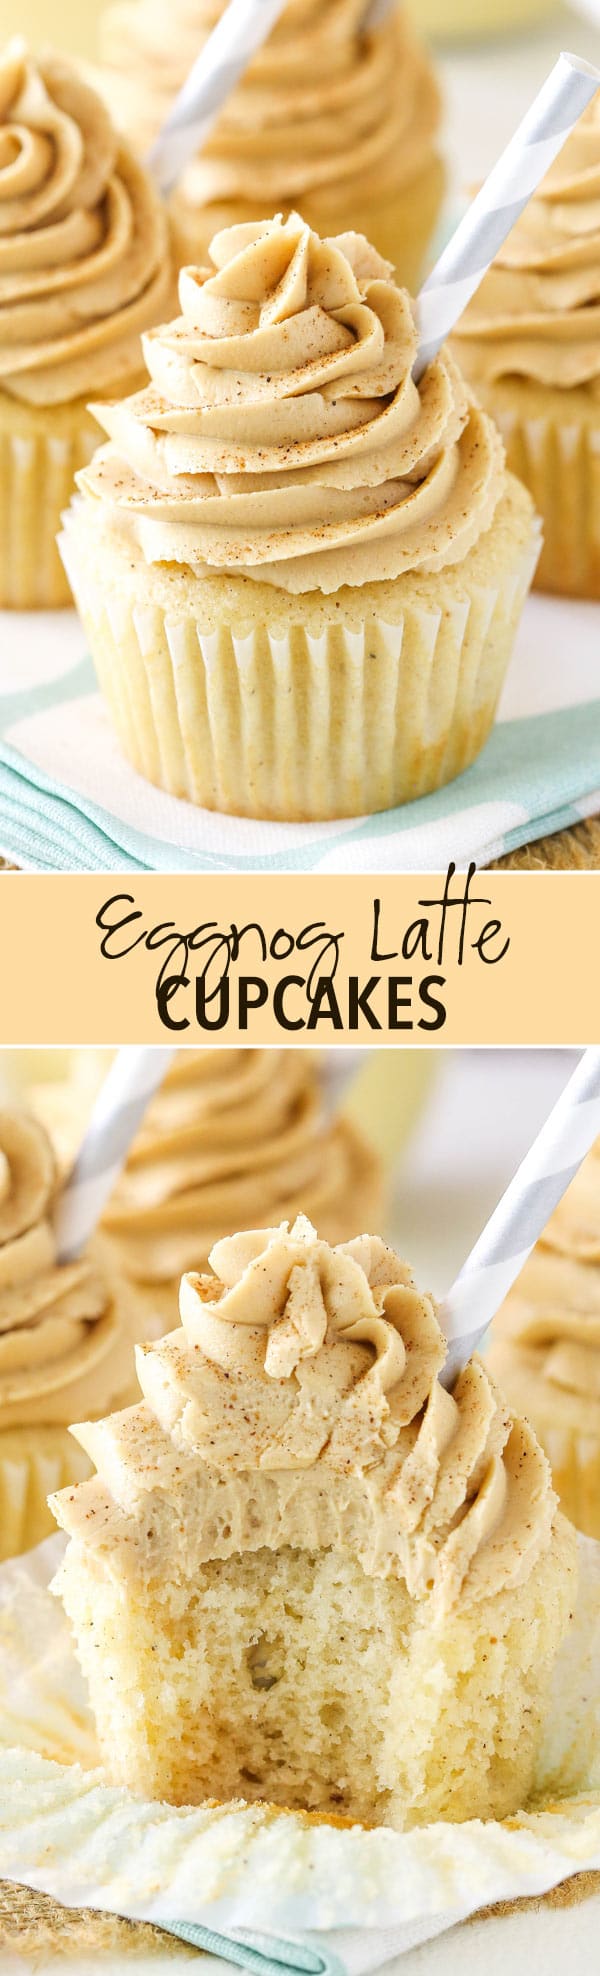 Eggnog Latte Cupcakes - a moist eggnog cupcake with espresso frosting! Perfect dessert for Christmas and the holidays!